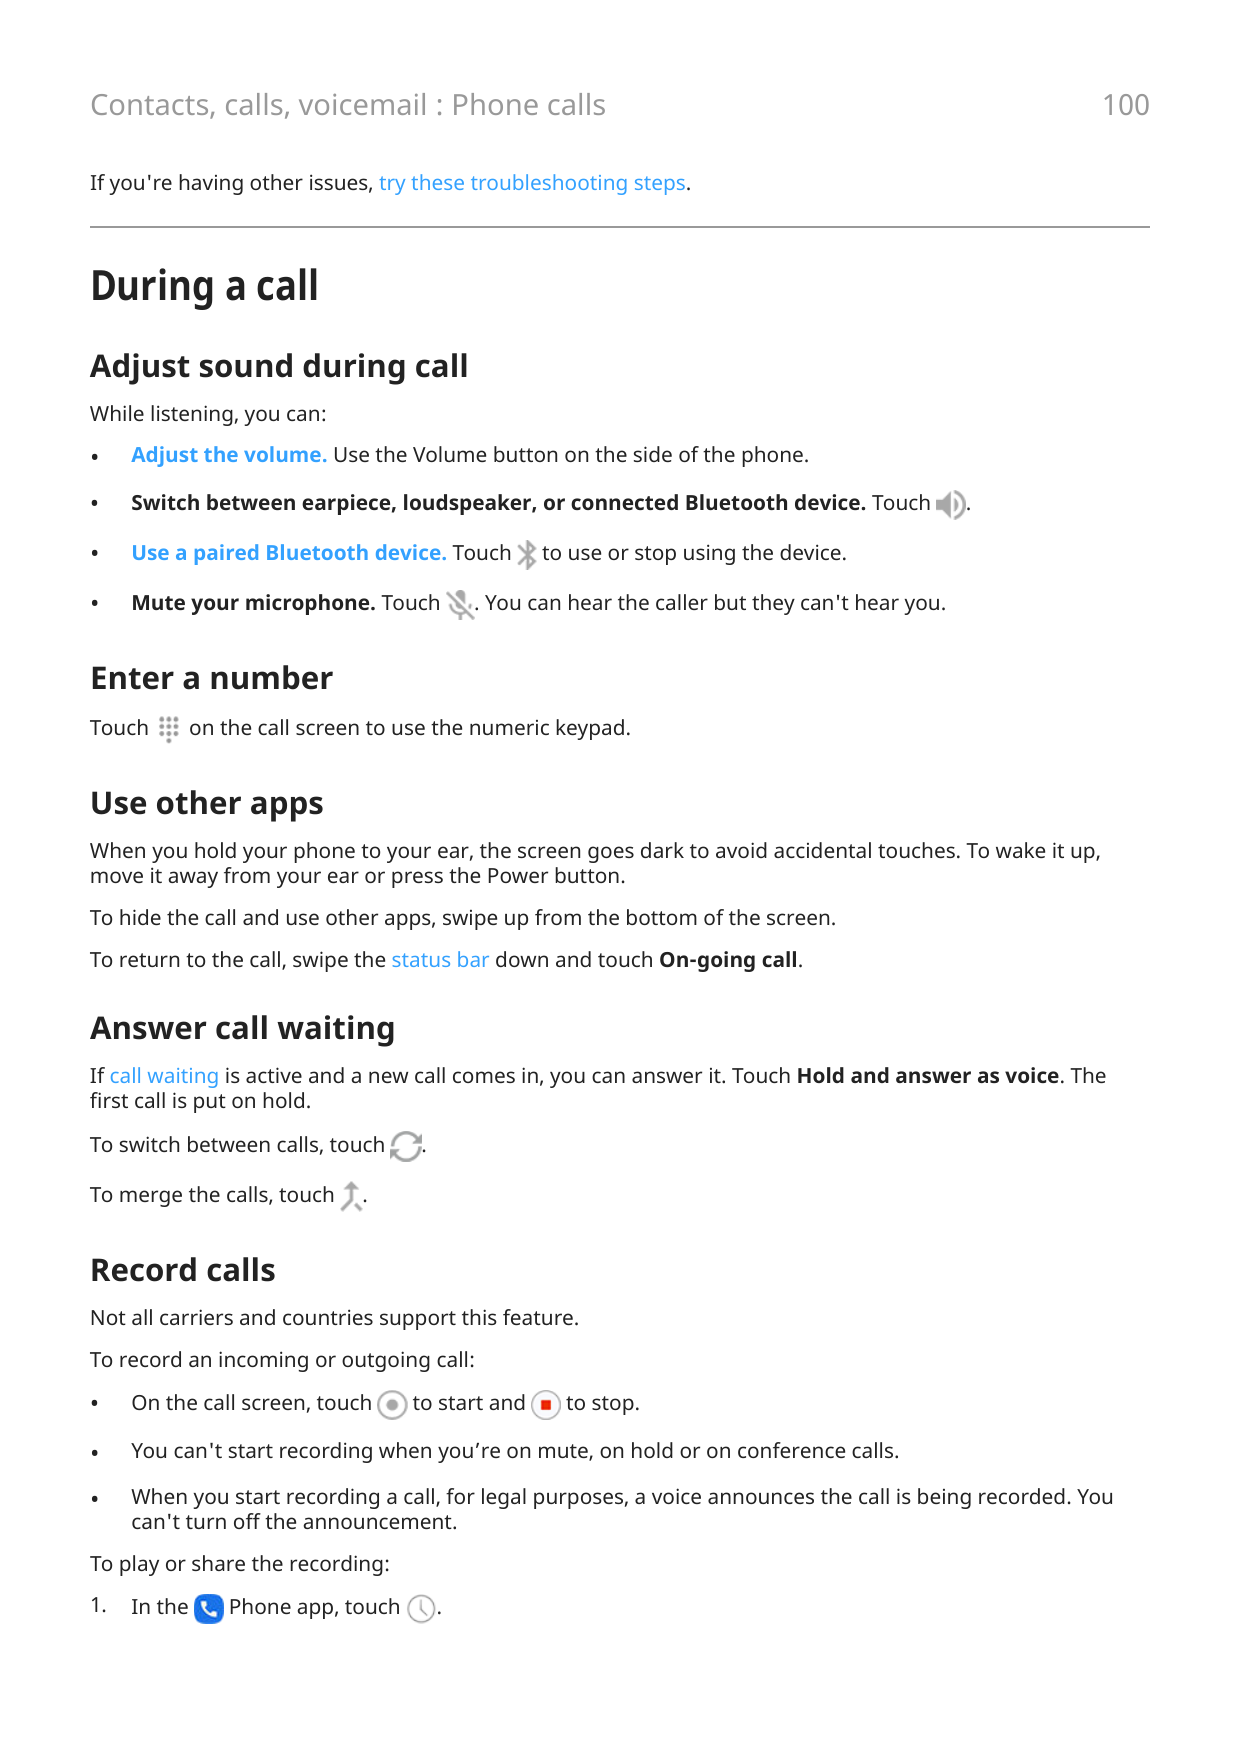 100Contacts, calls, voicemail : Phone callsIf you're having other issues, try these troubleshooting steps.During a callAdjust so